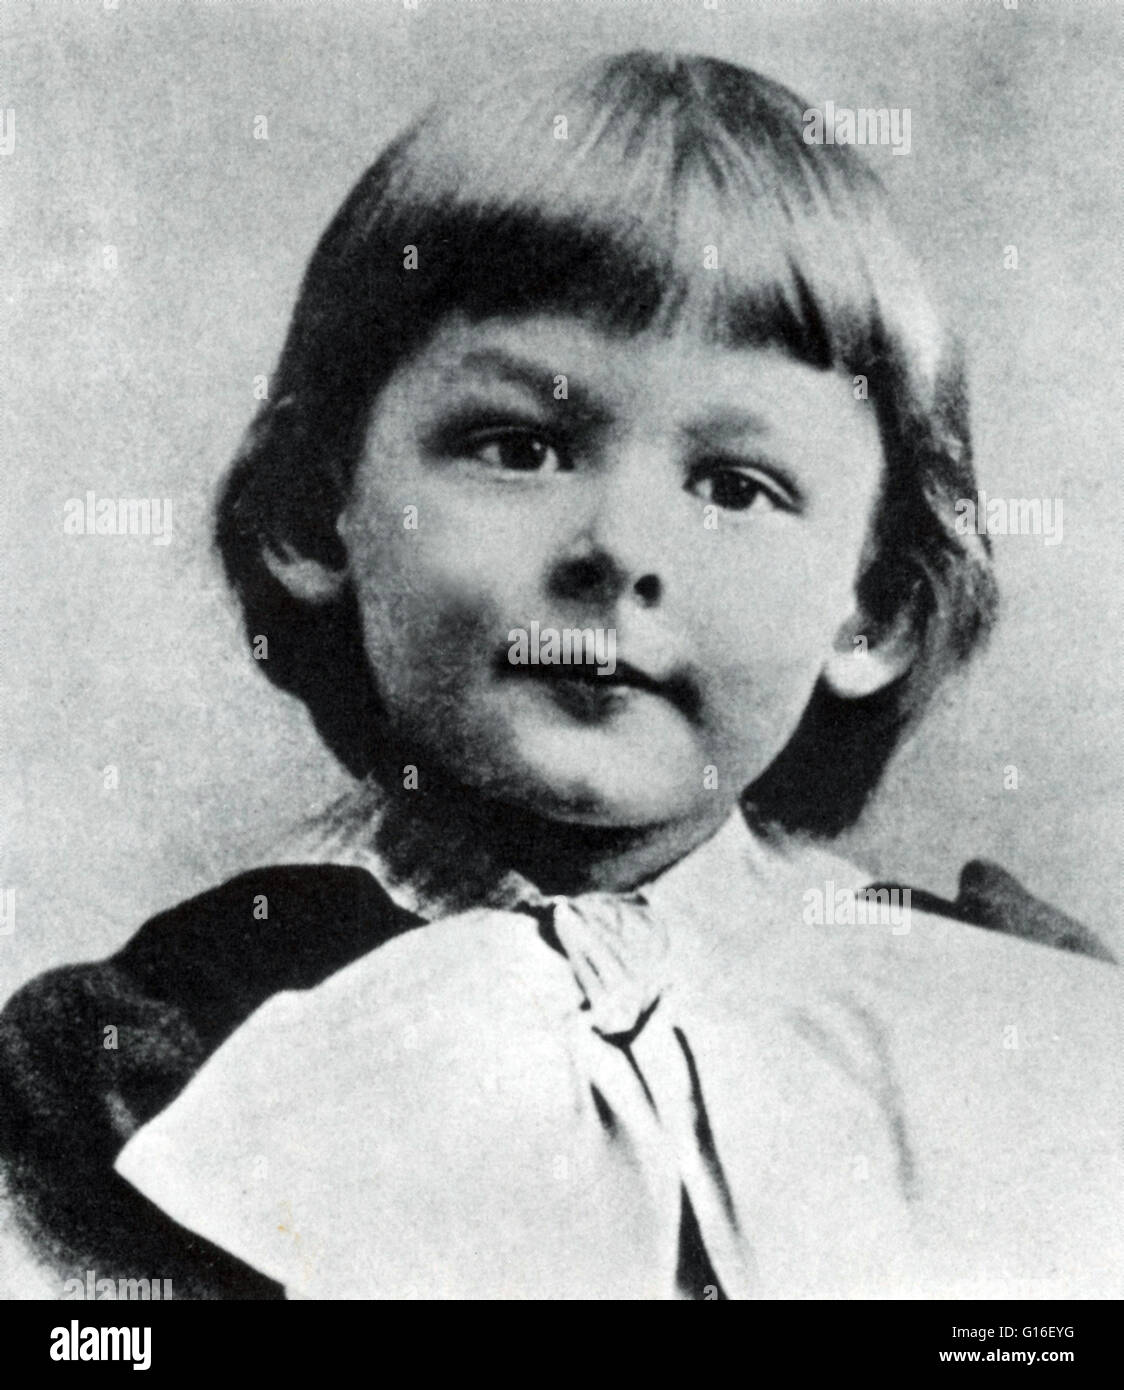 Eliot photographed at the age of 3. Thomas Stearns Eliot (September 26, 1888 - January 4, 1965) was an American-born, British essayist, publisher, playwright, literary and social critic, and 'one of the 20th century's major poets'. He emigrated to England Stock Photo